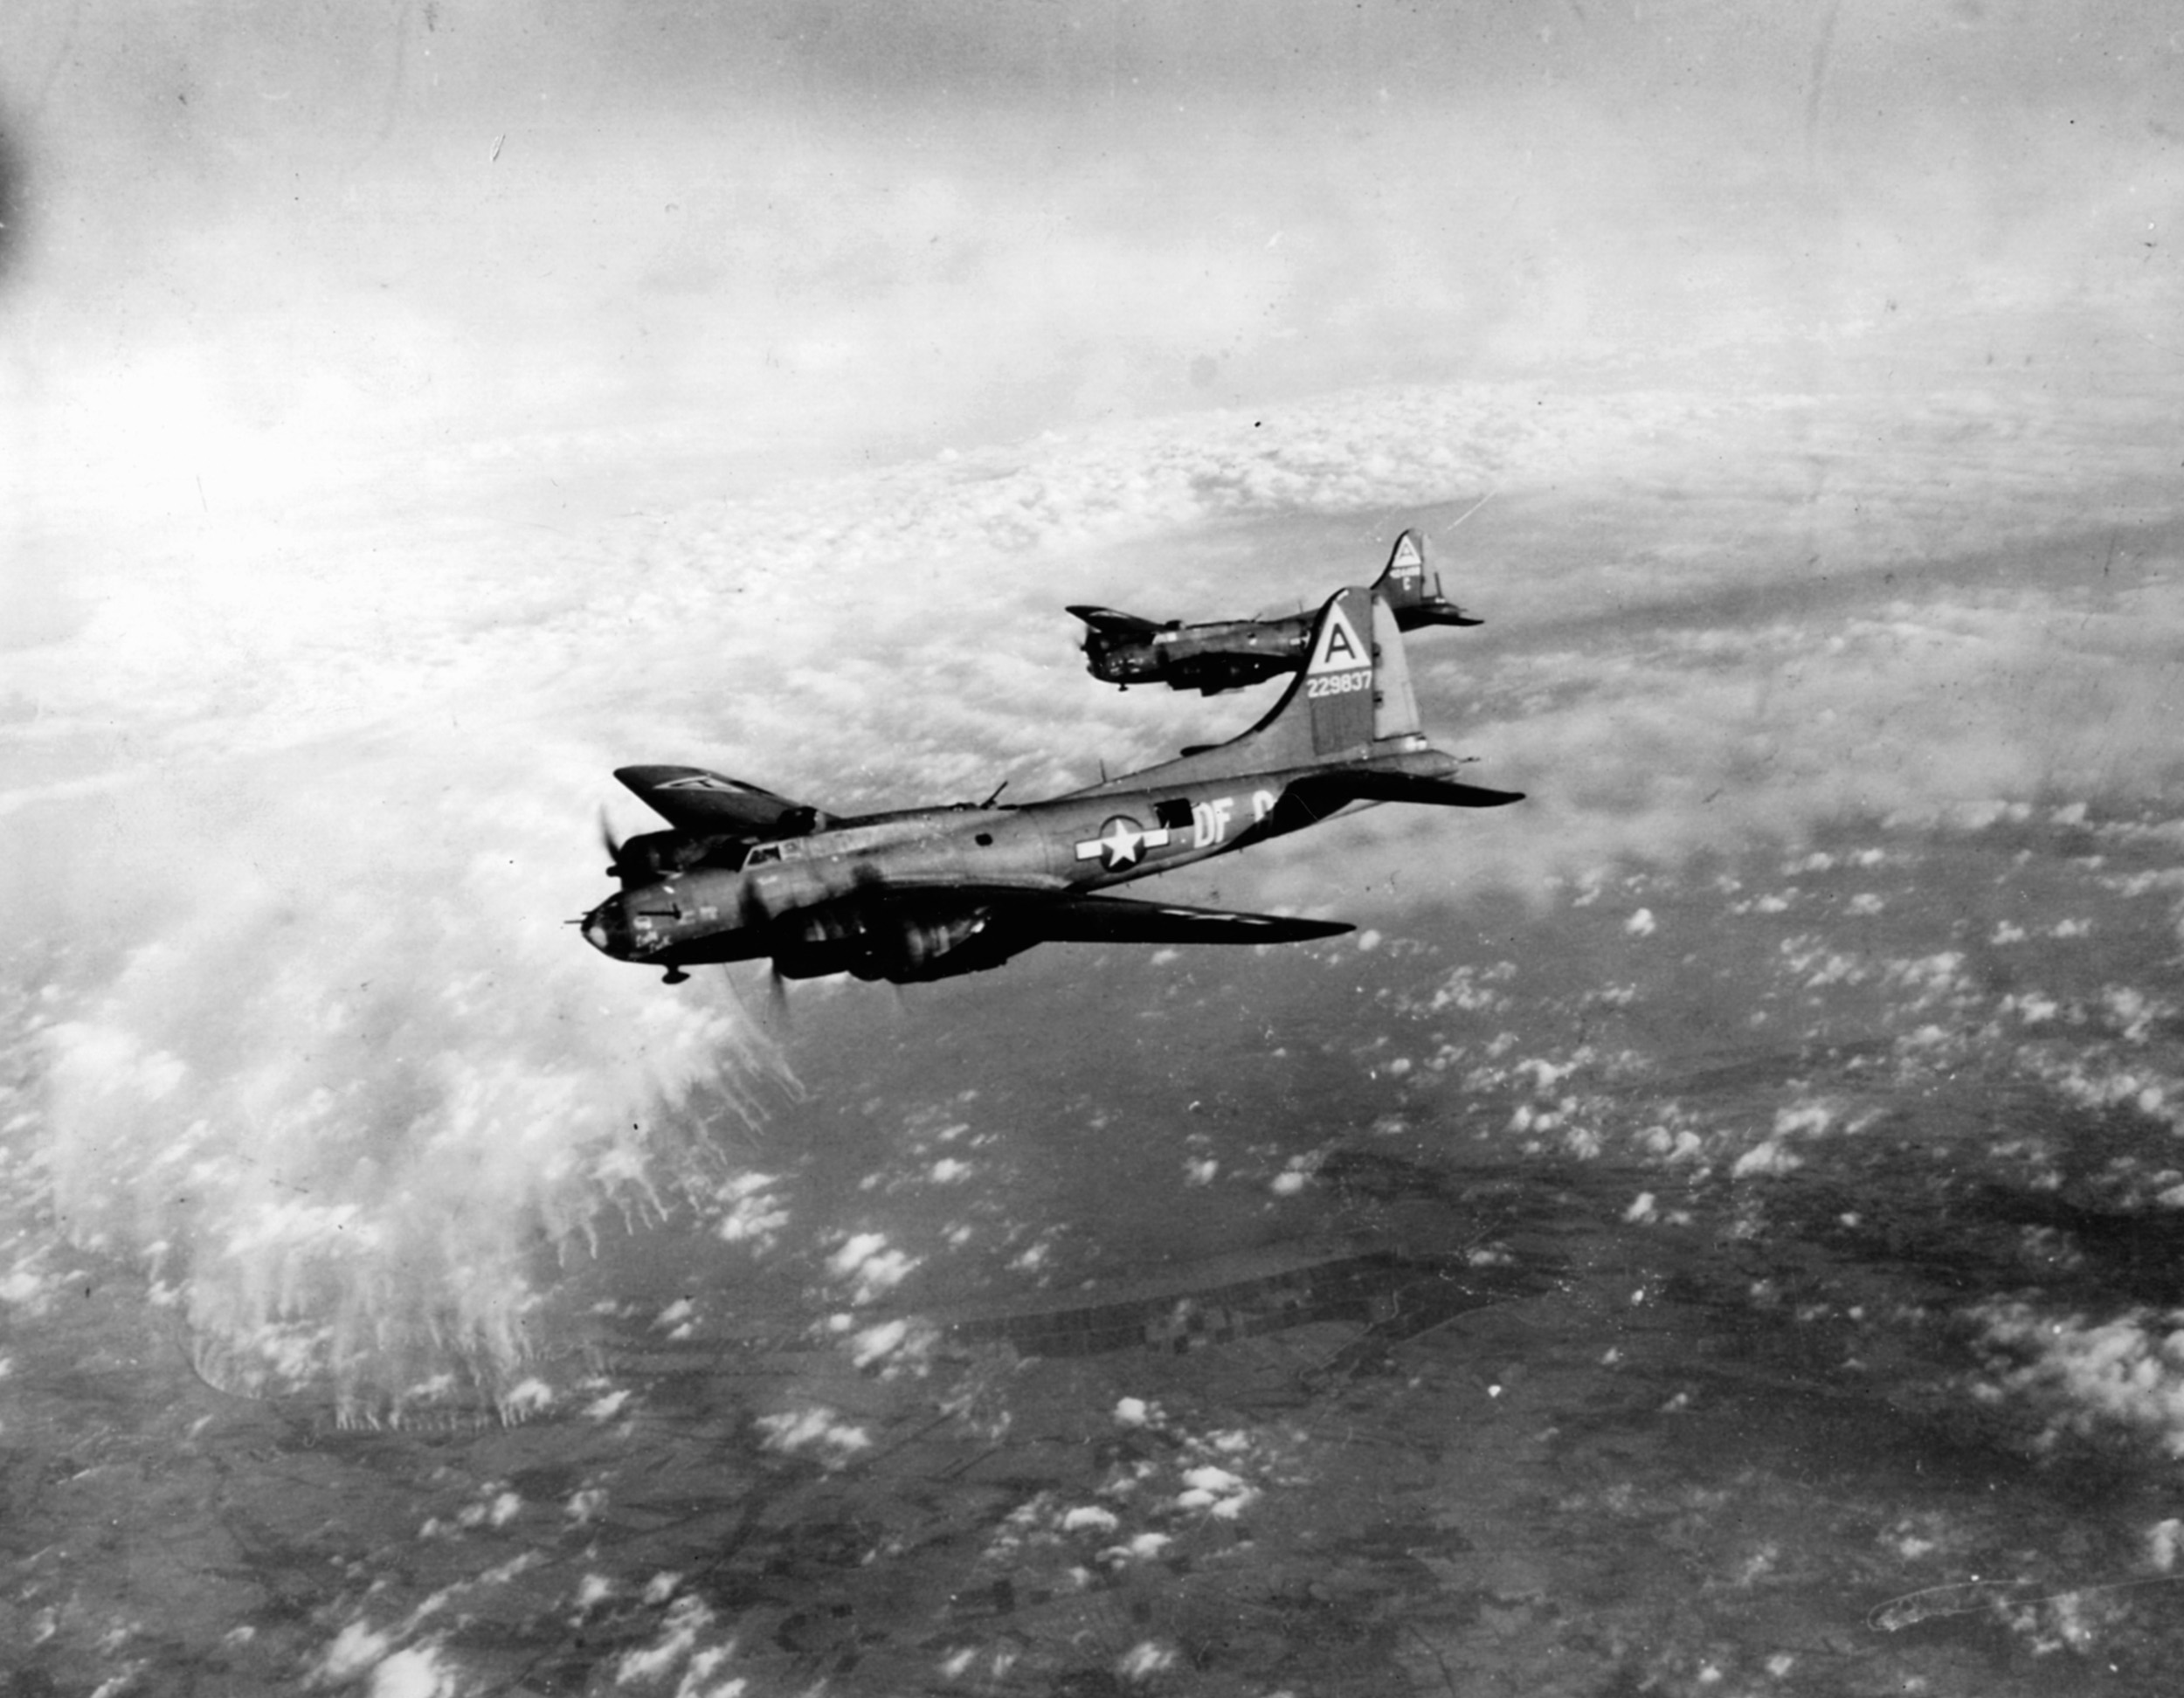 B-17s from the 91st Bomb Group encounter flak over Bremen. Enemy fighters also braved the flak, flying to within 25 yards of the American bombers.